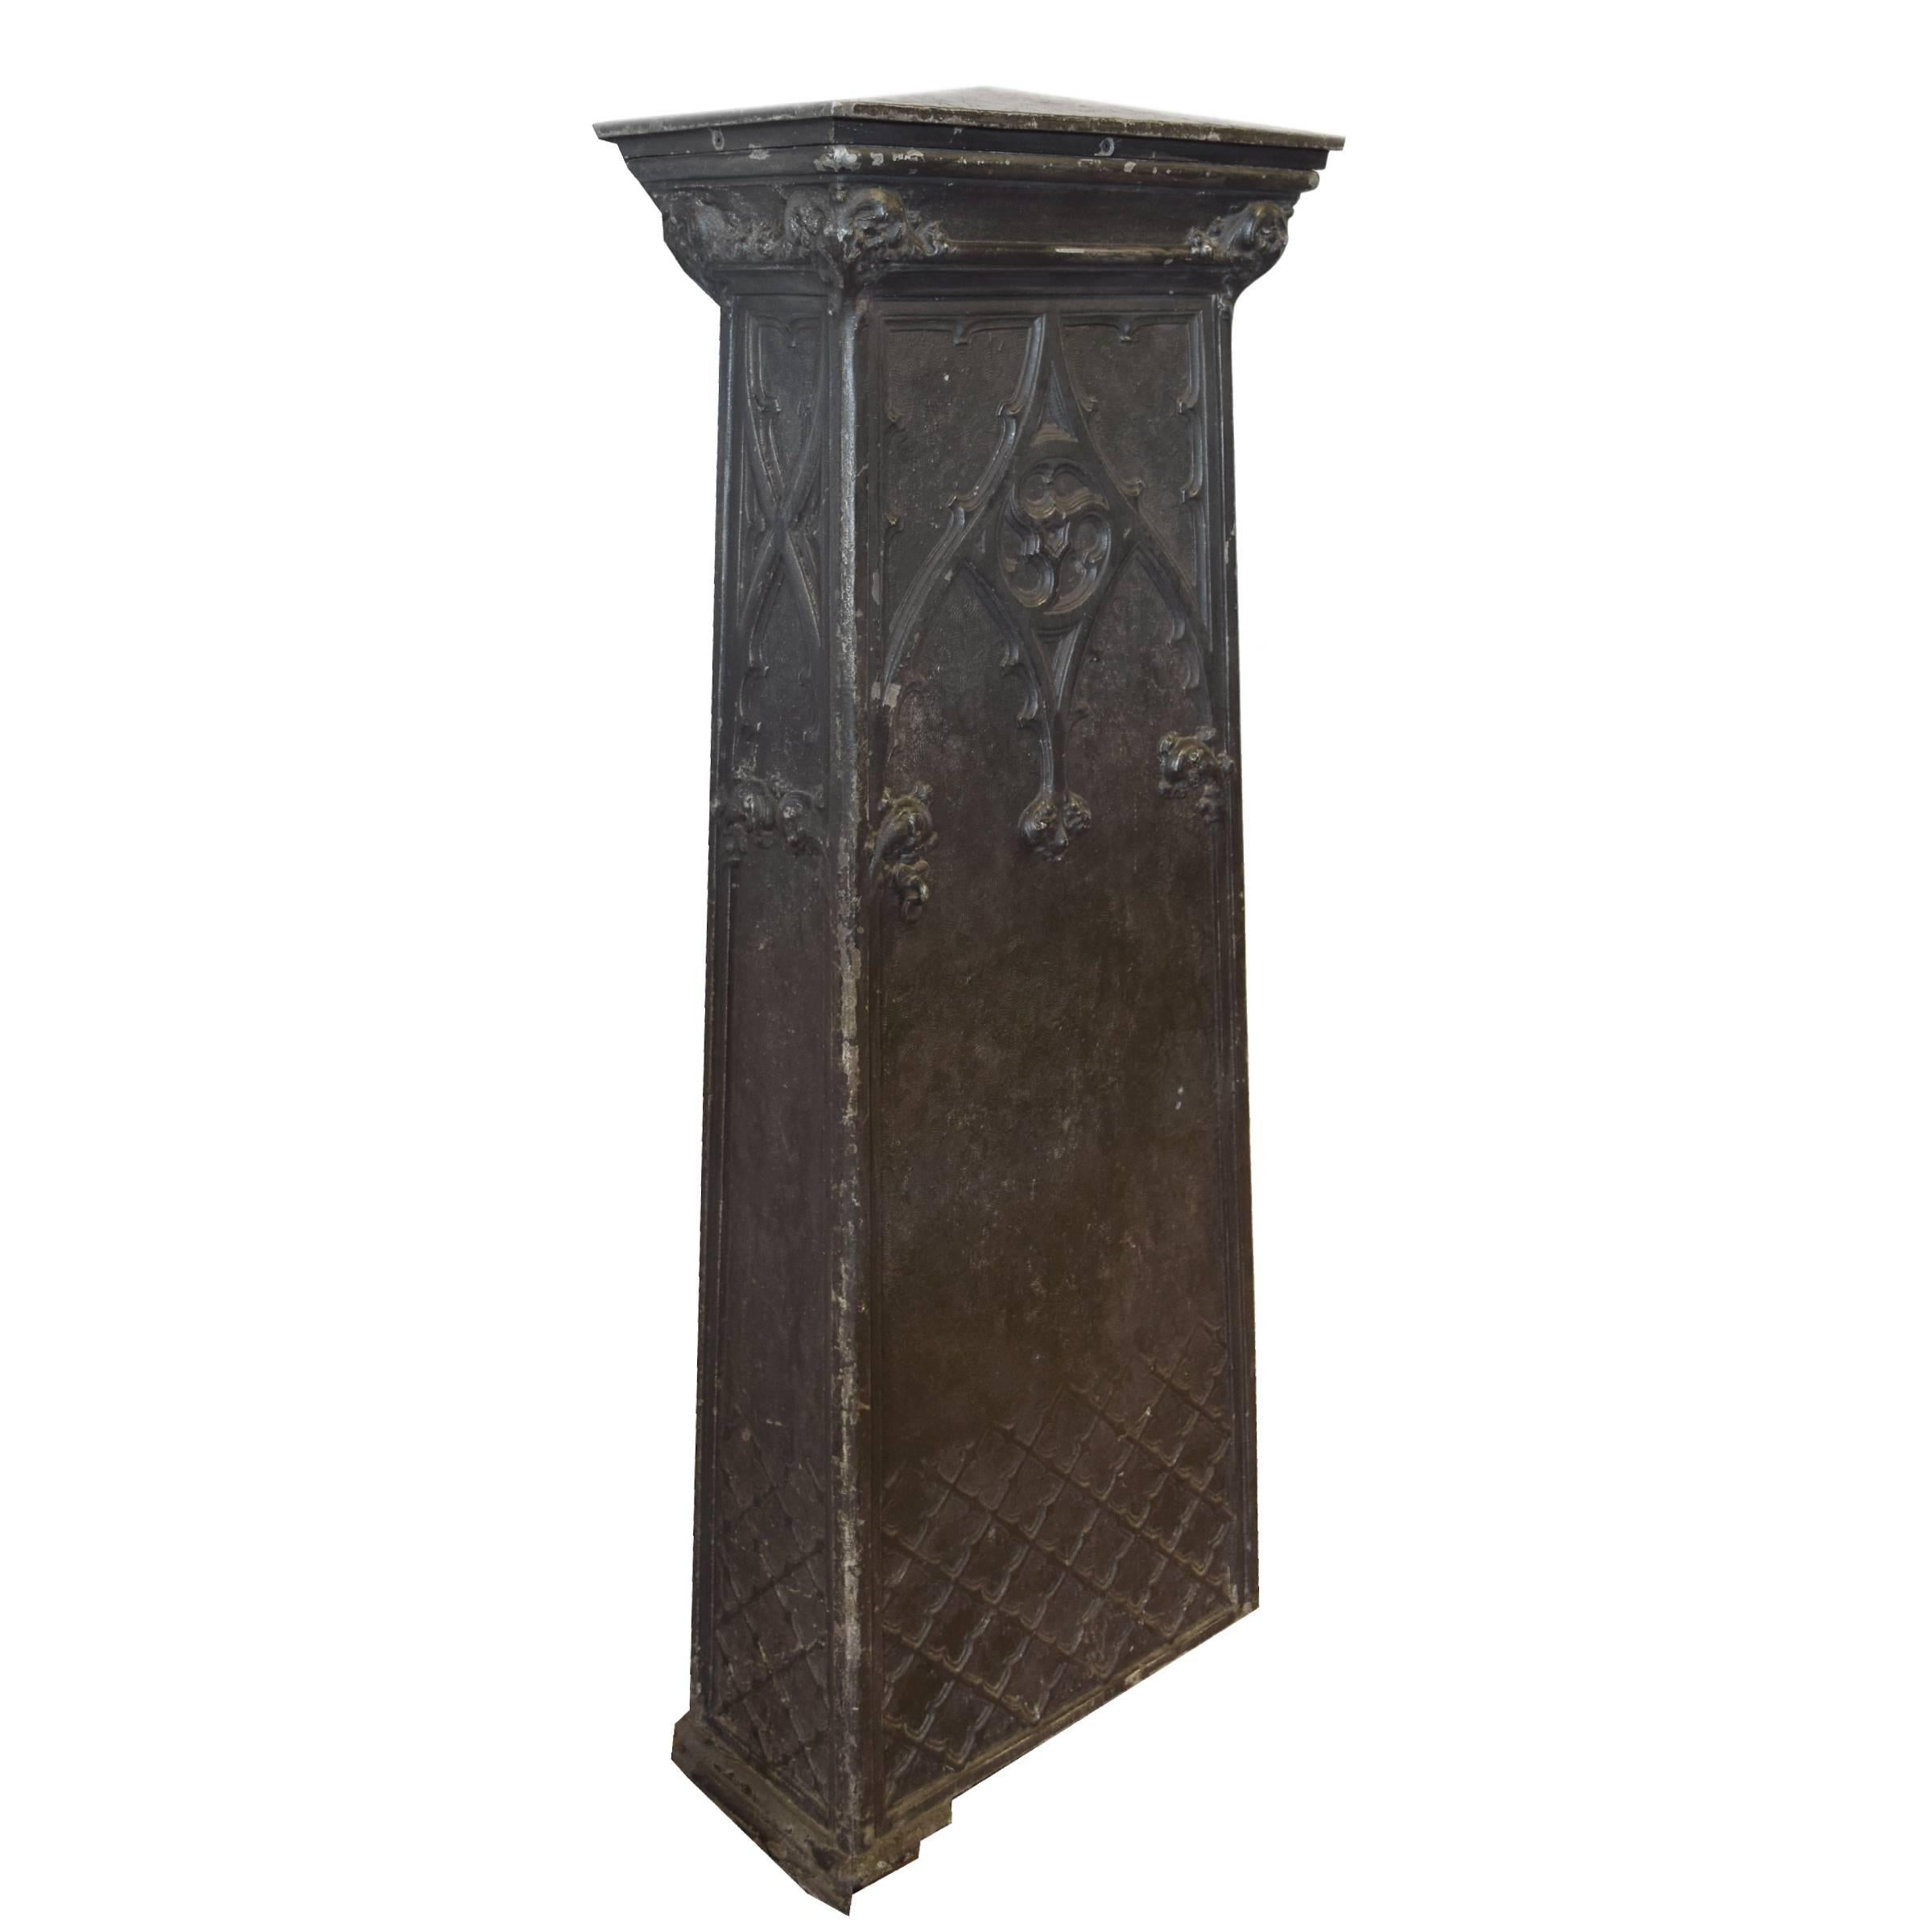 An American cast iron newel post manufactured by the Winslow Brother's Foundry from the Isabella Building, Chicago, IL. The Isabella Building, by architect William LeBaron Jenney, was completed in 1893 and still stands today at 21 E Van Buren St.